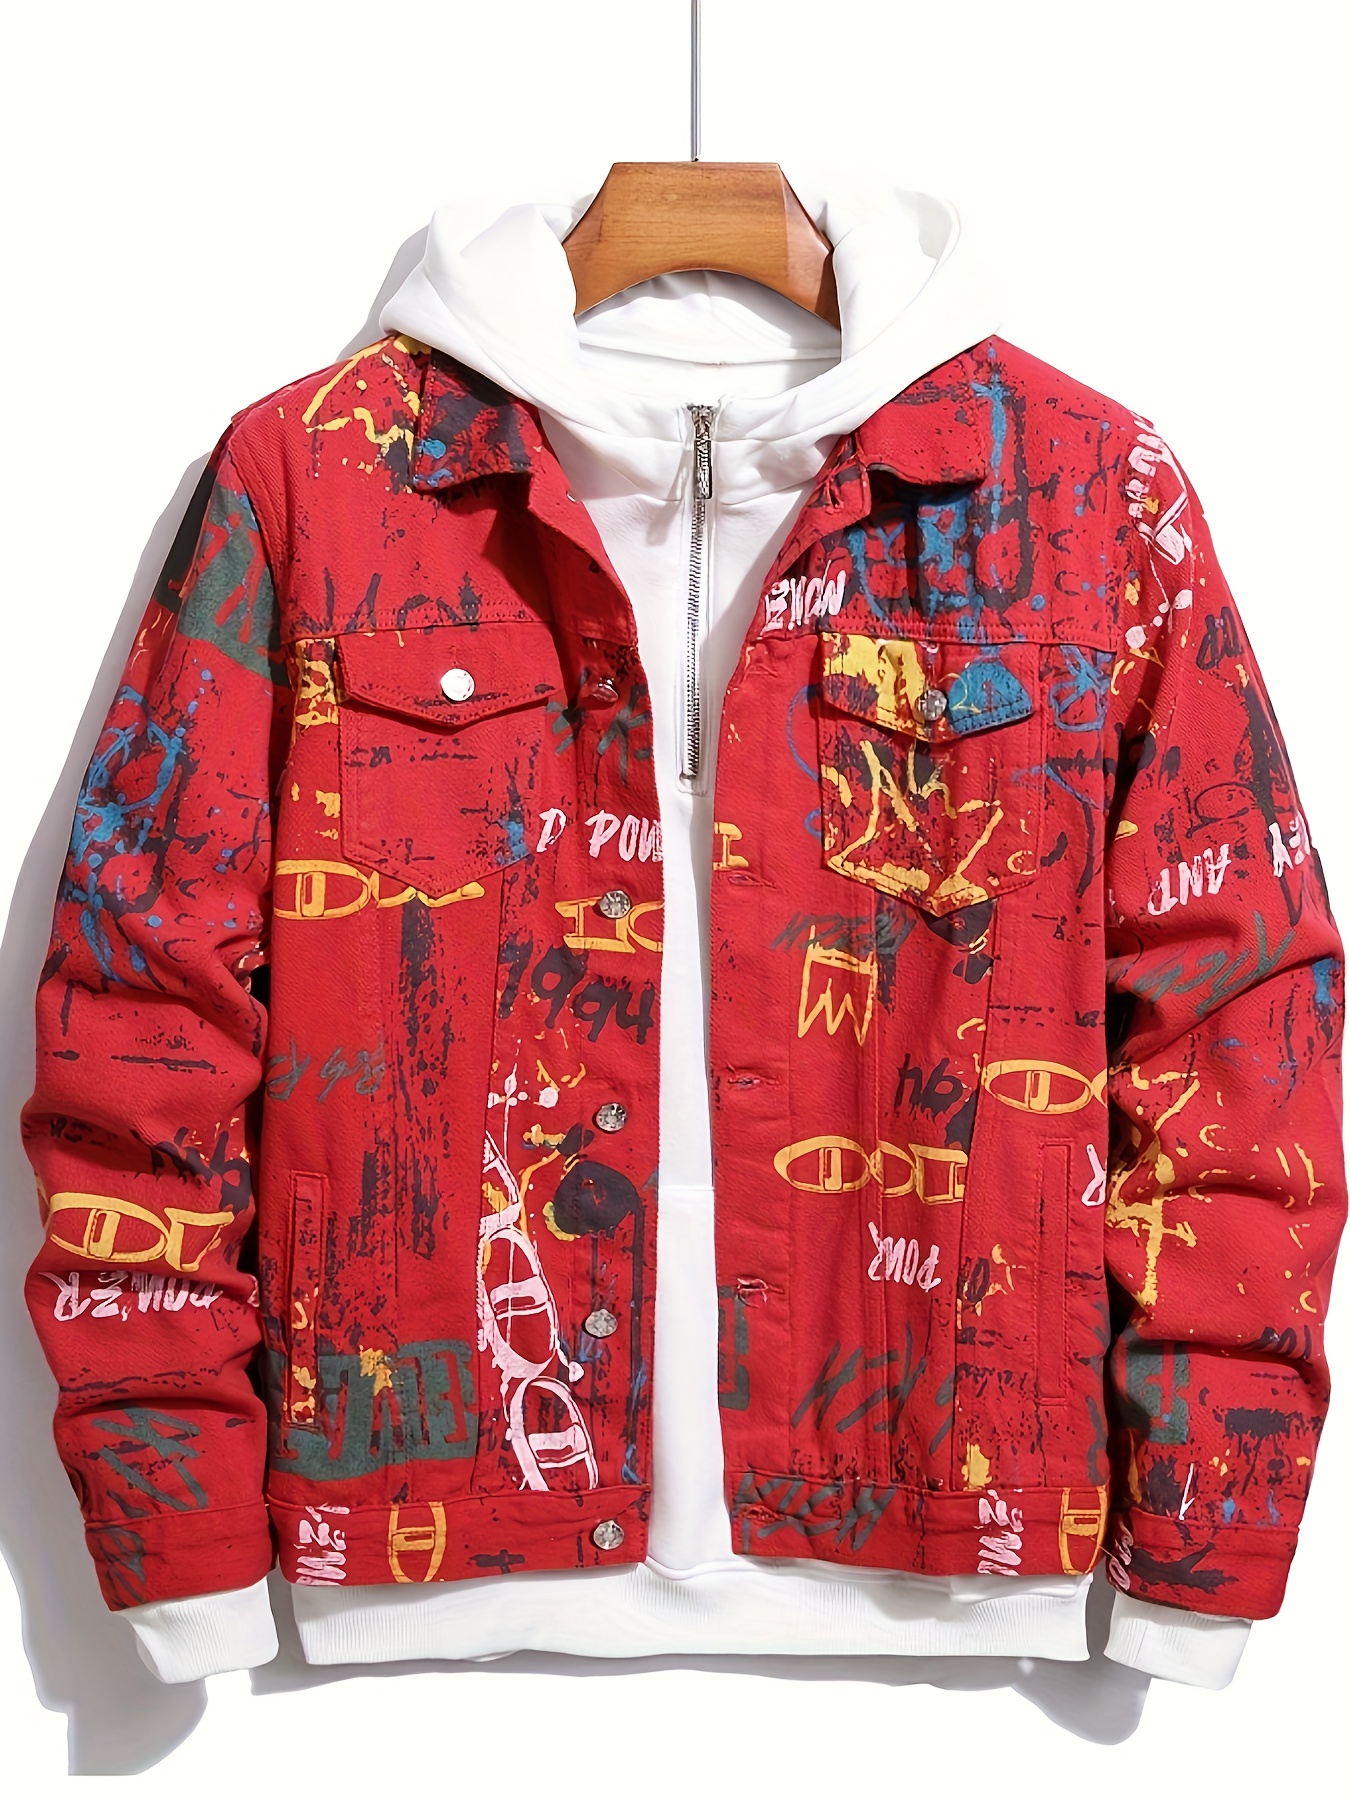 LV windbreaker two sides wear : r/topclothes